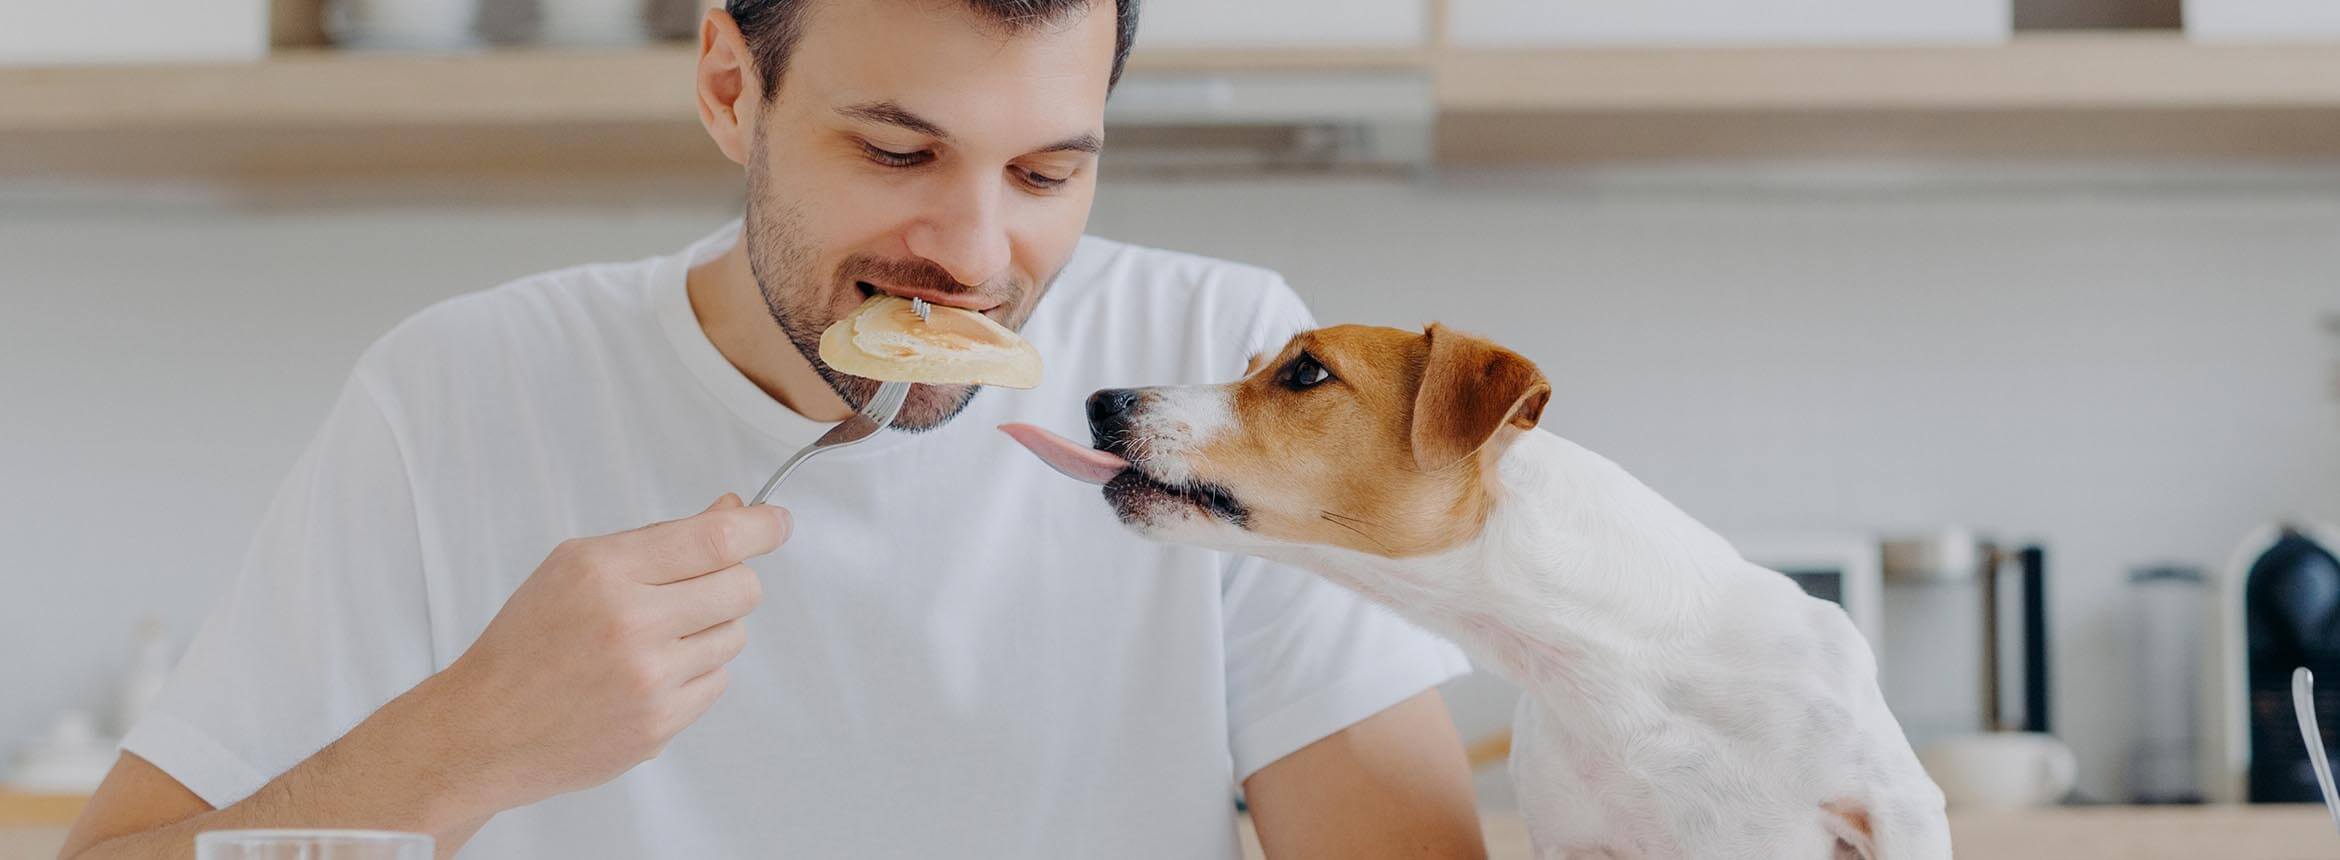 image of man eating with dog at table